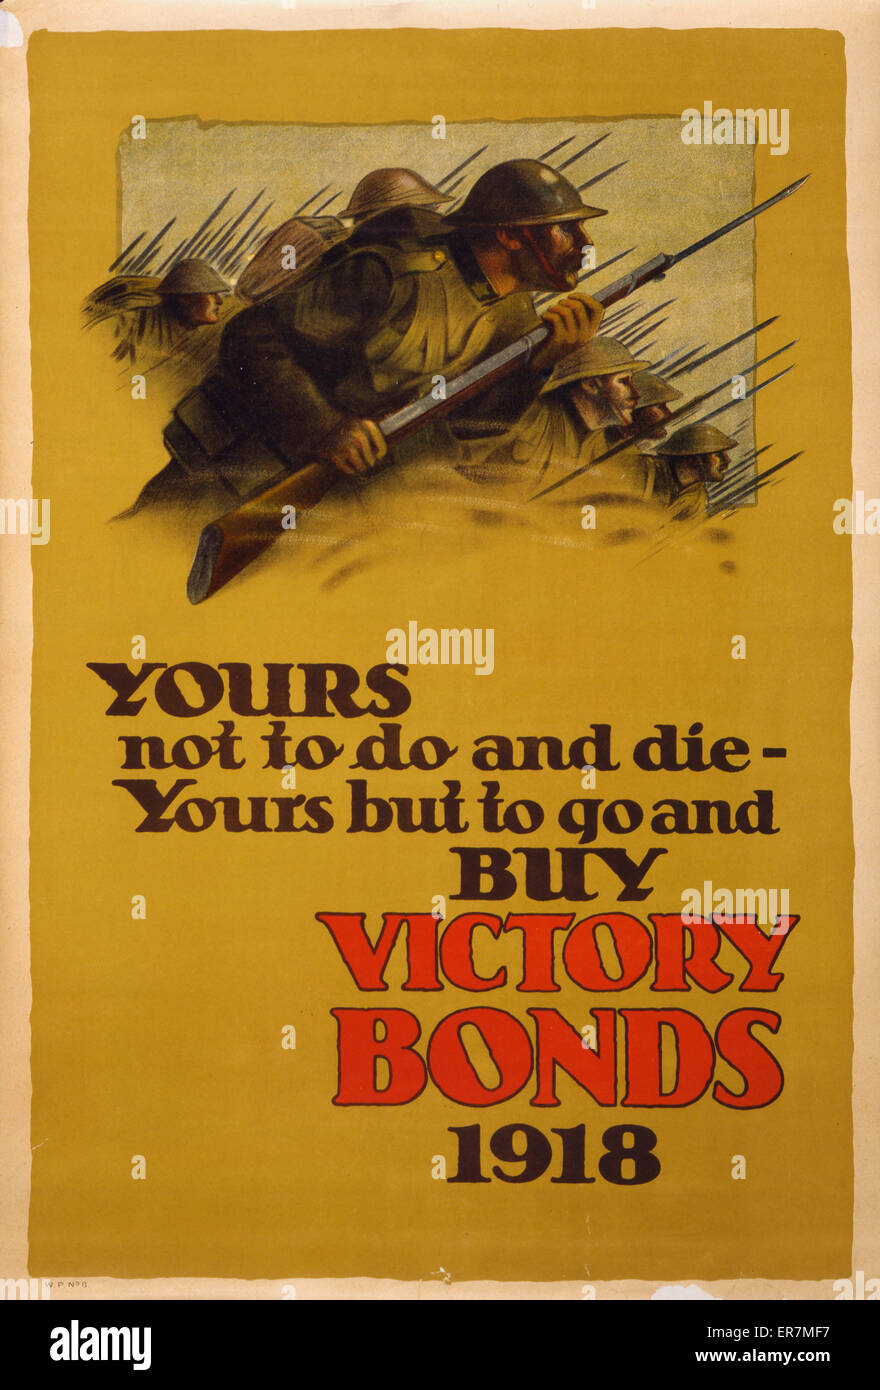 Yours not to do and die - yours but to go and buy Victory Bonds. Poster shows Canadian soldiers, with bayonets drawn, going into battle. Date 1918. Stock Photo